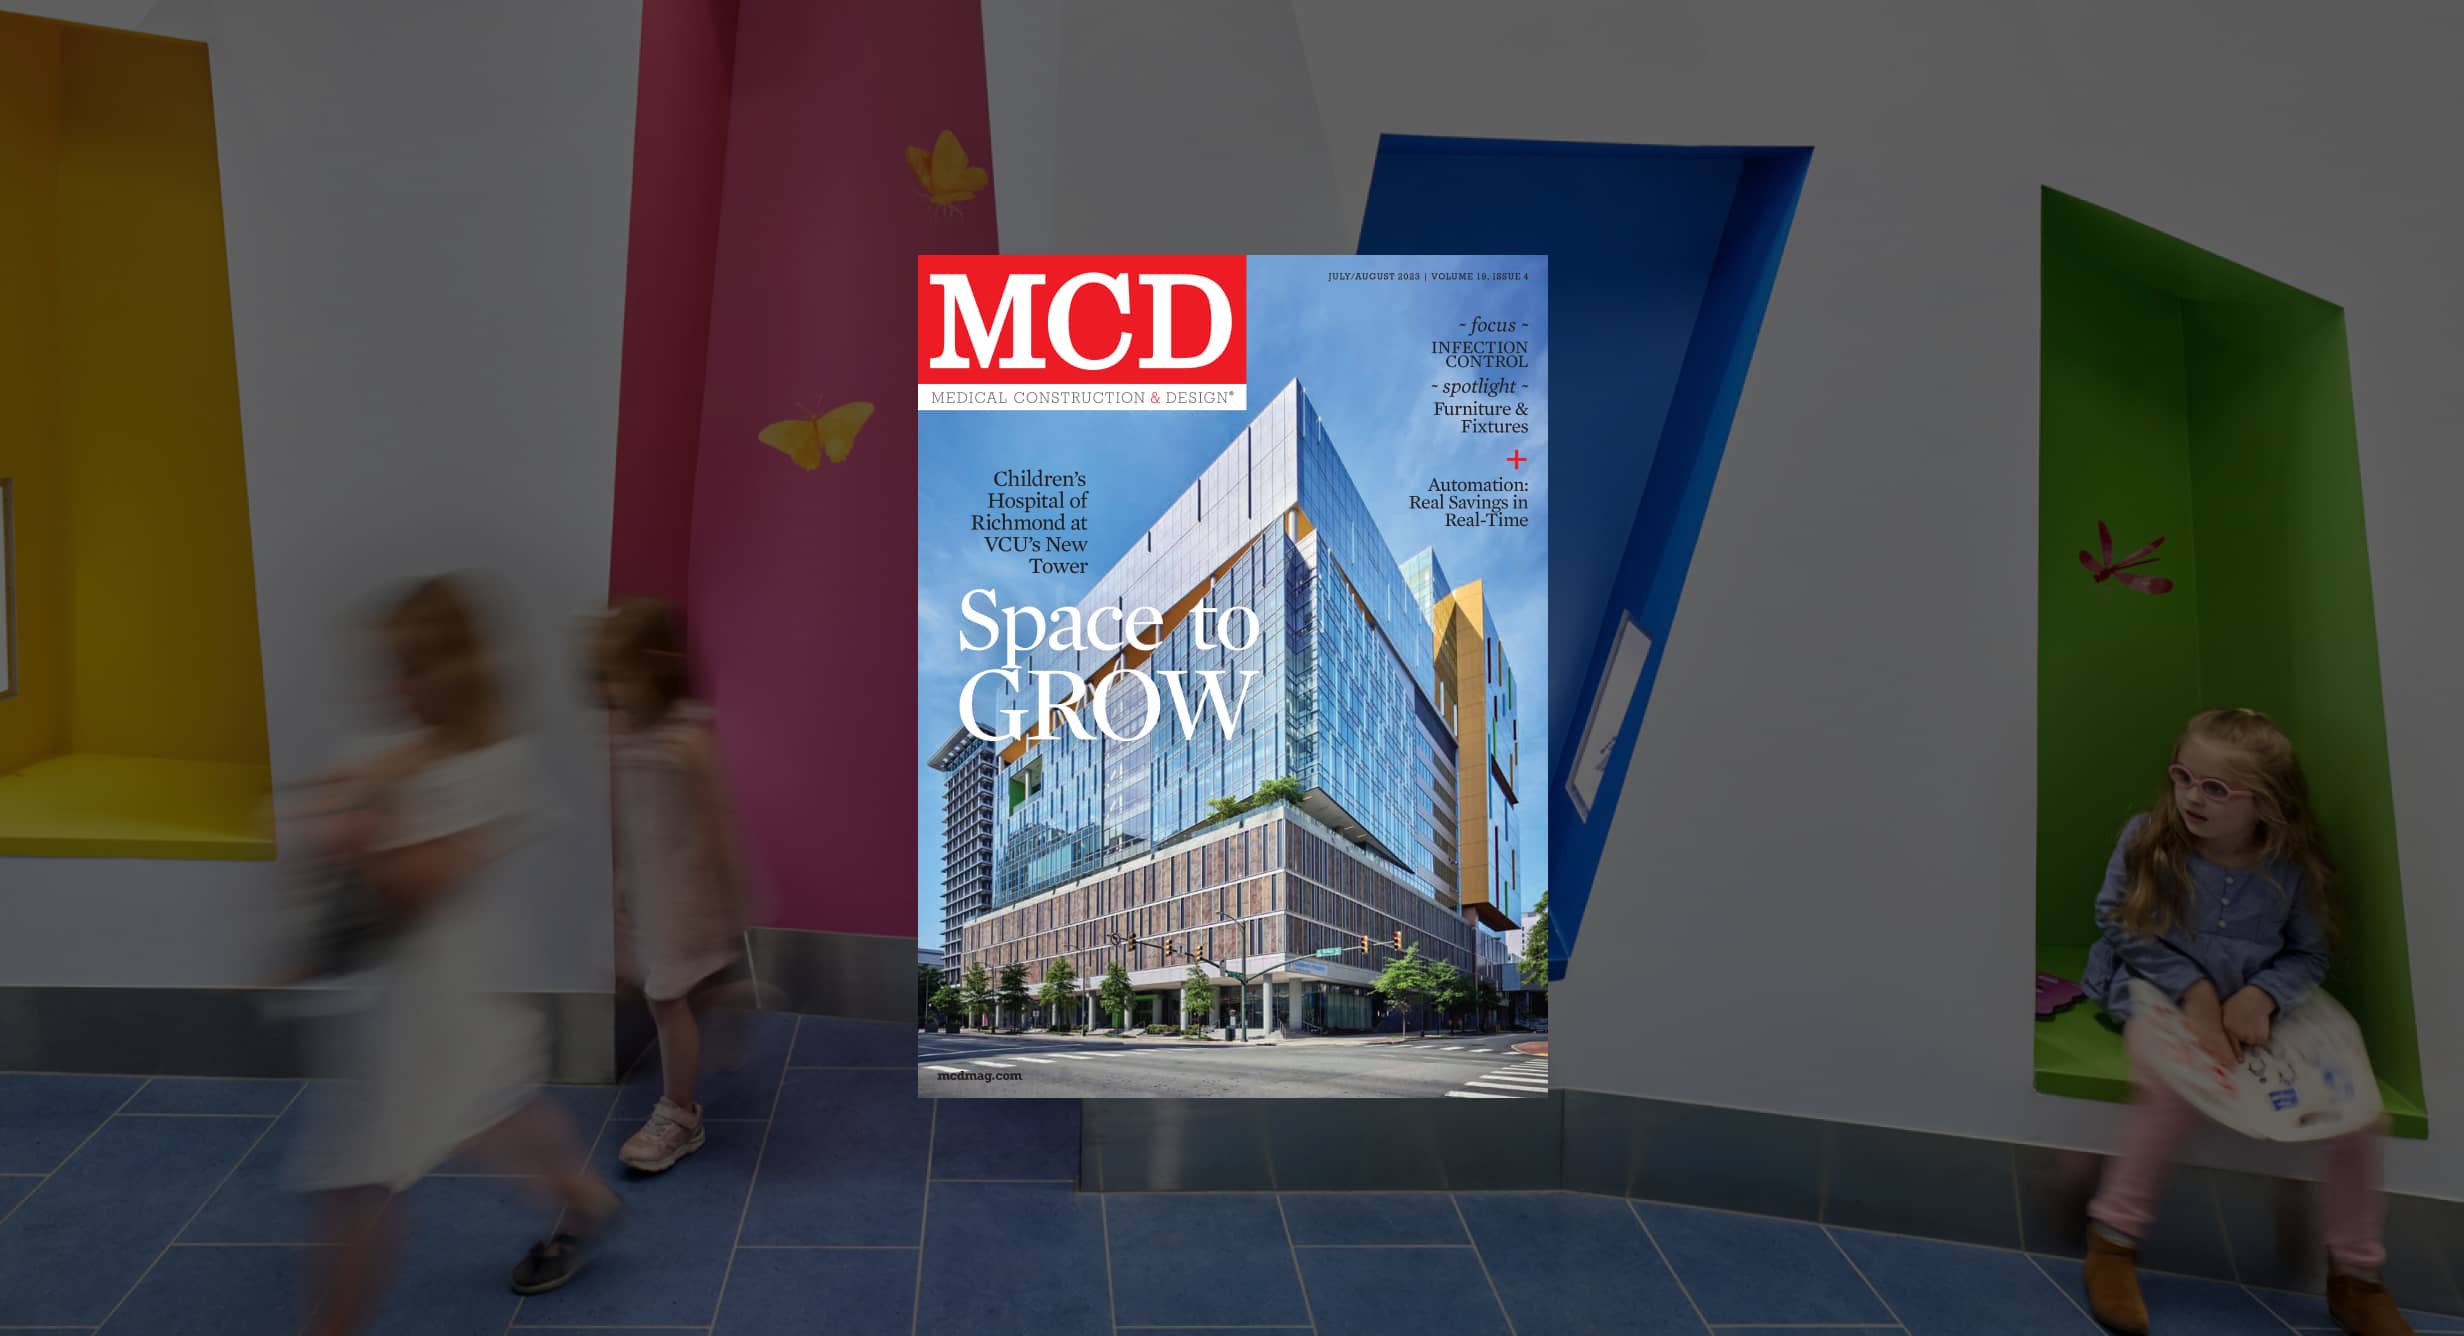 Children’s Hospital of Richmond at VCU’s New Tower: Space to Grow